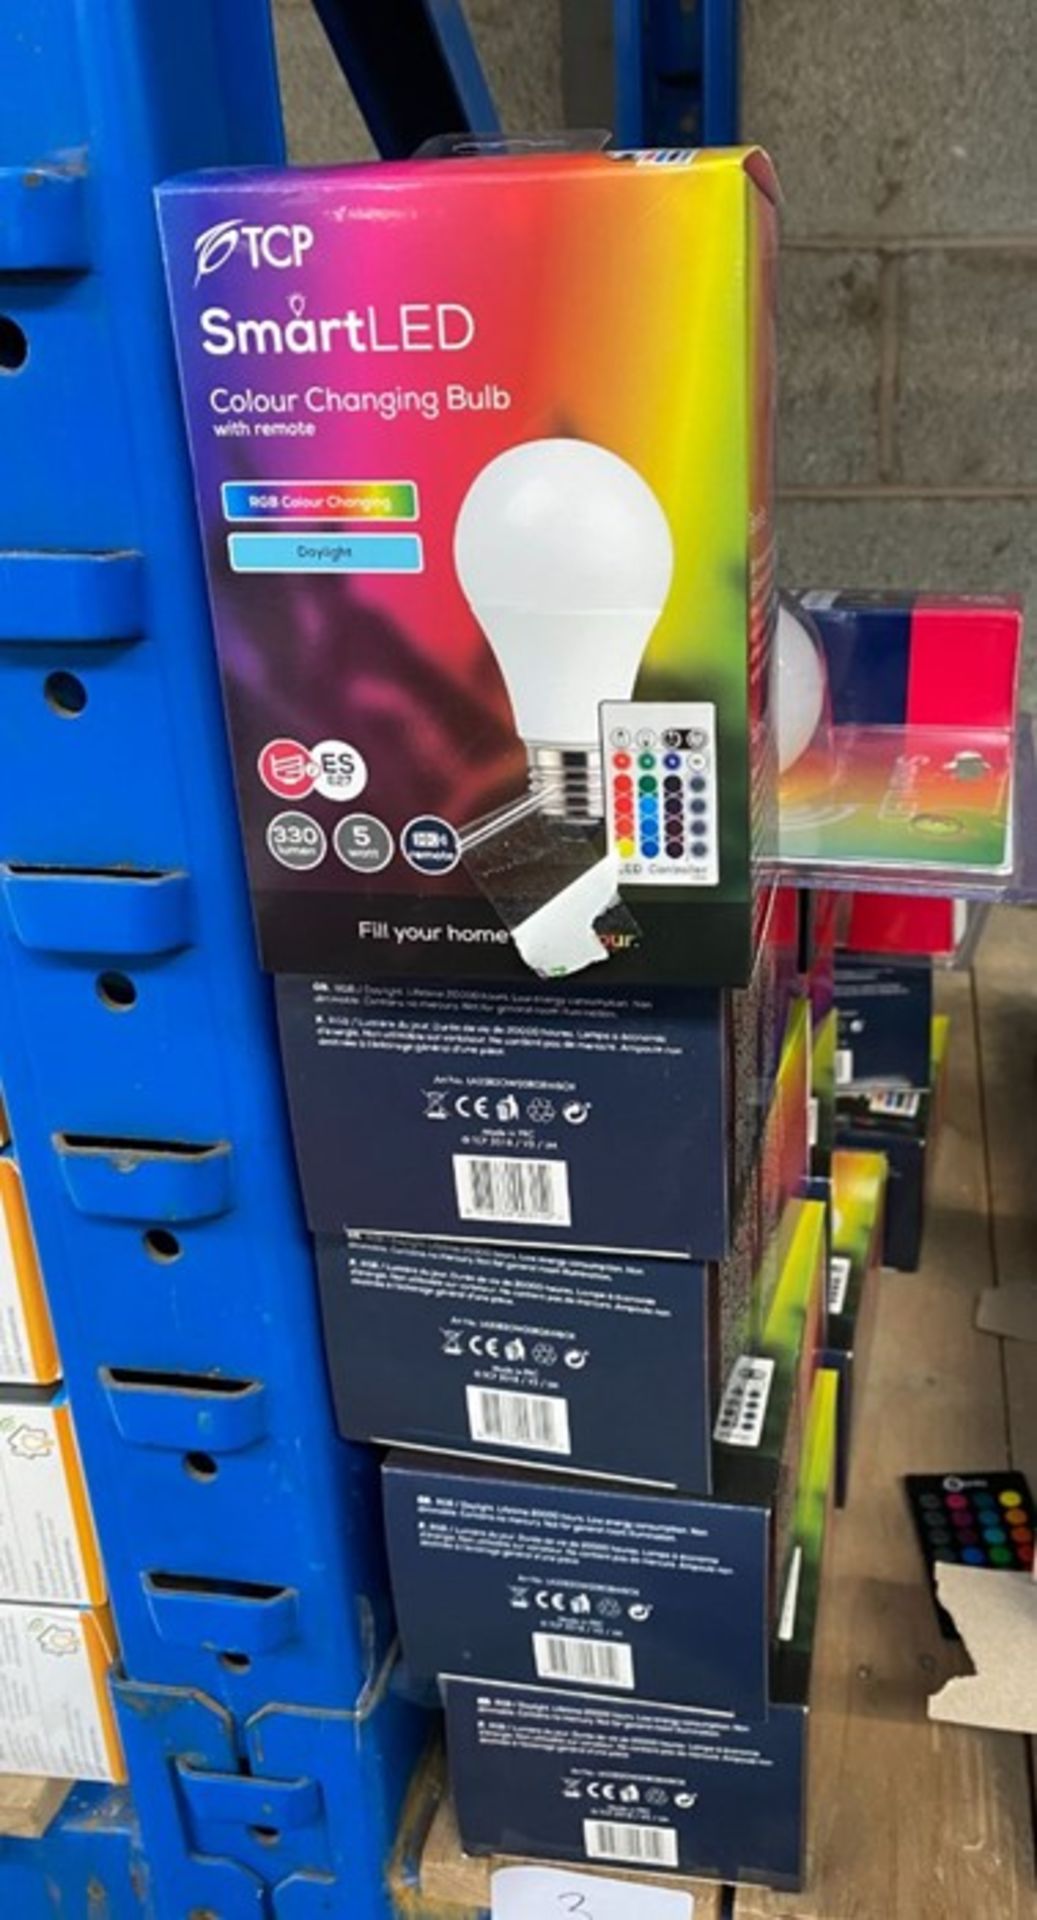 1 LOT TO CONTAIN AN ASSORTMENT OF TCP SMART LED COLOUR CHANGING BULBS (UNTESTED CUSTOMER RETURNS)